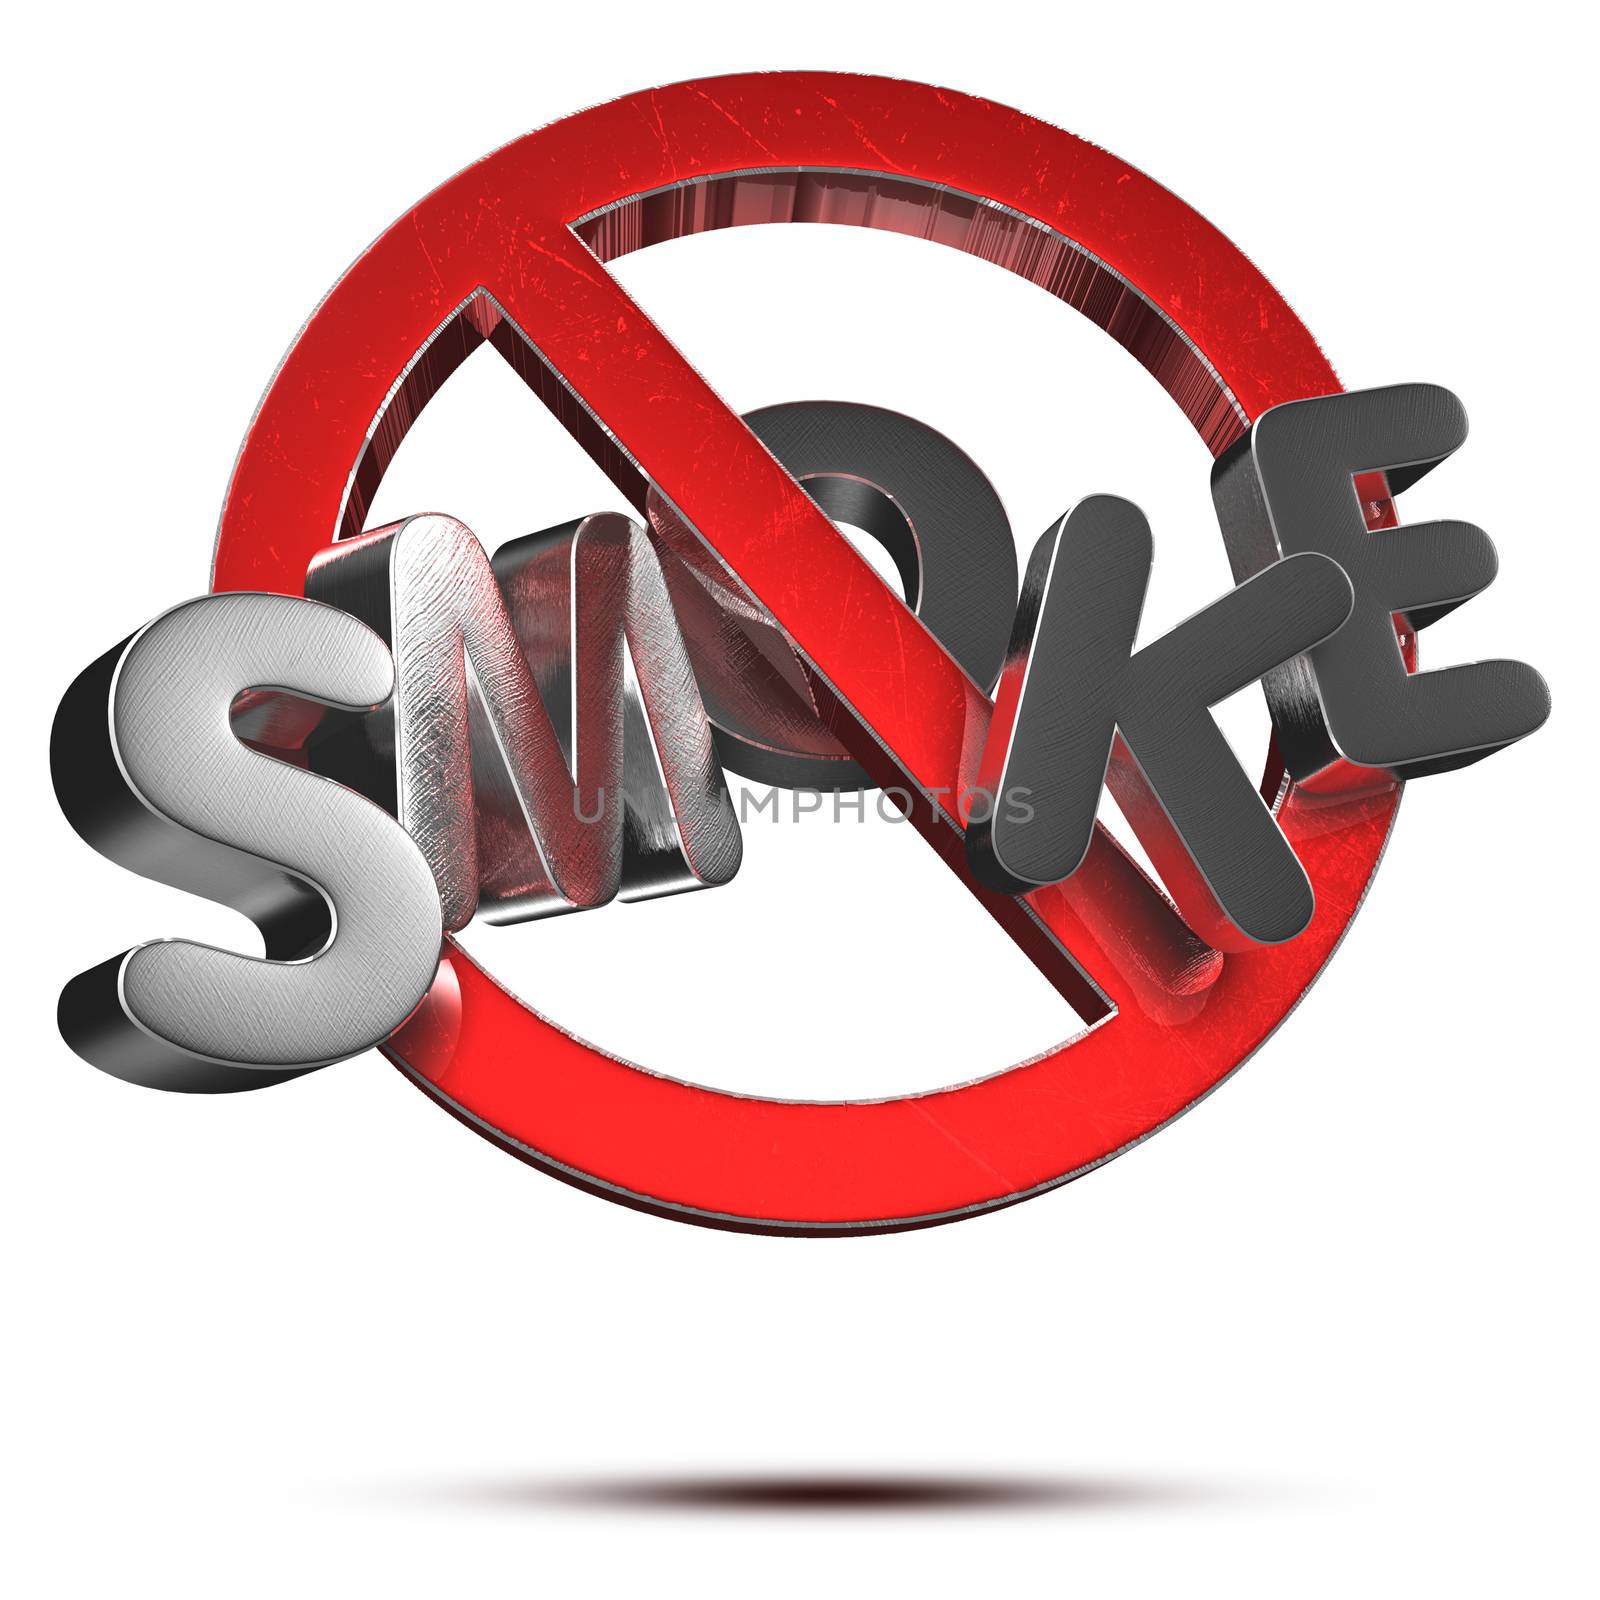 Non-smoking label message 3D rendering on white background.(with Clipping Path).